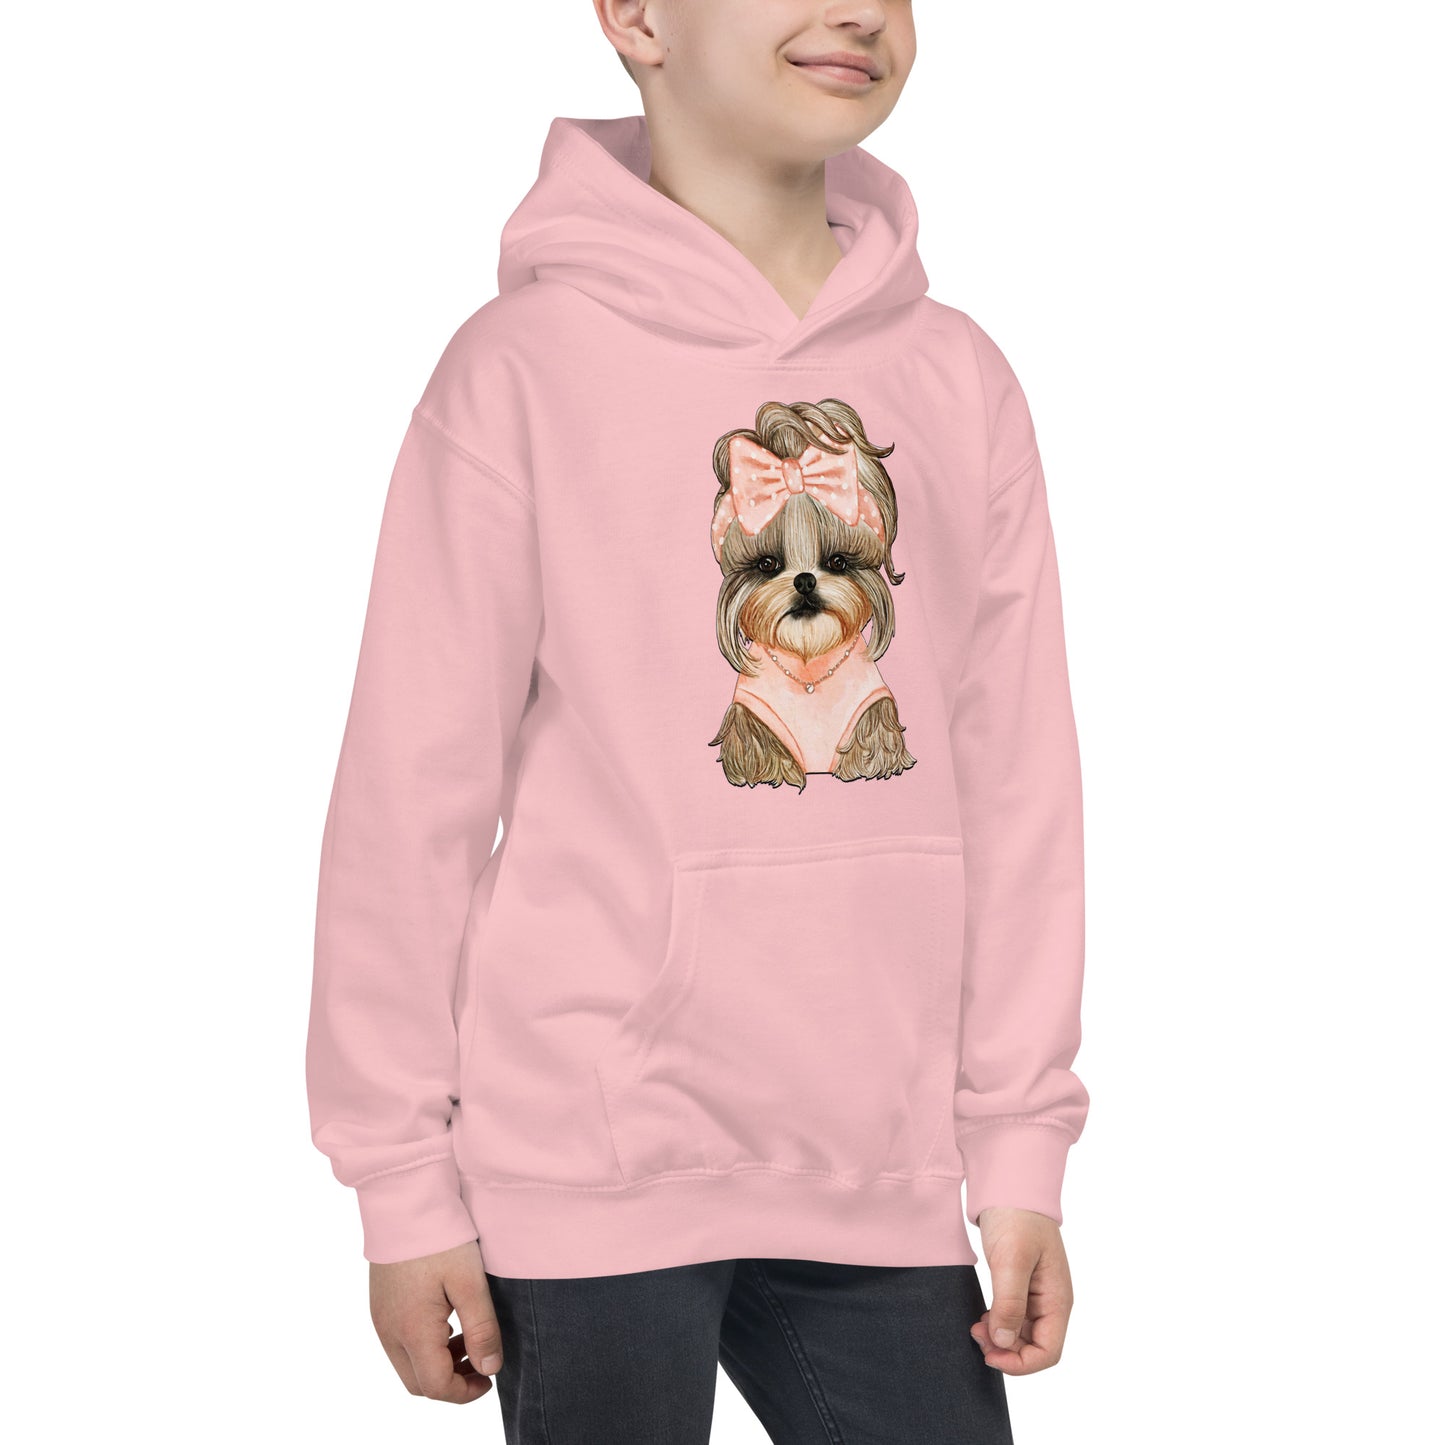 Adorable Dog with Cute Hair Ribbon Hoodie, No. 0561